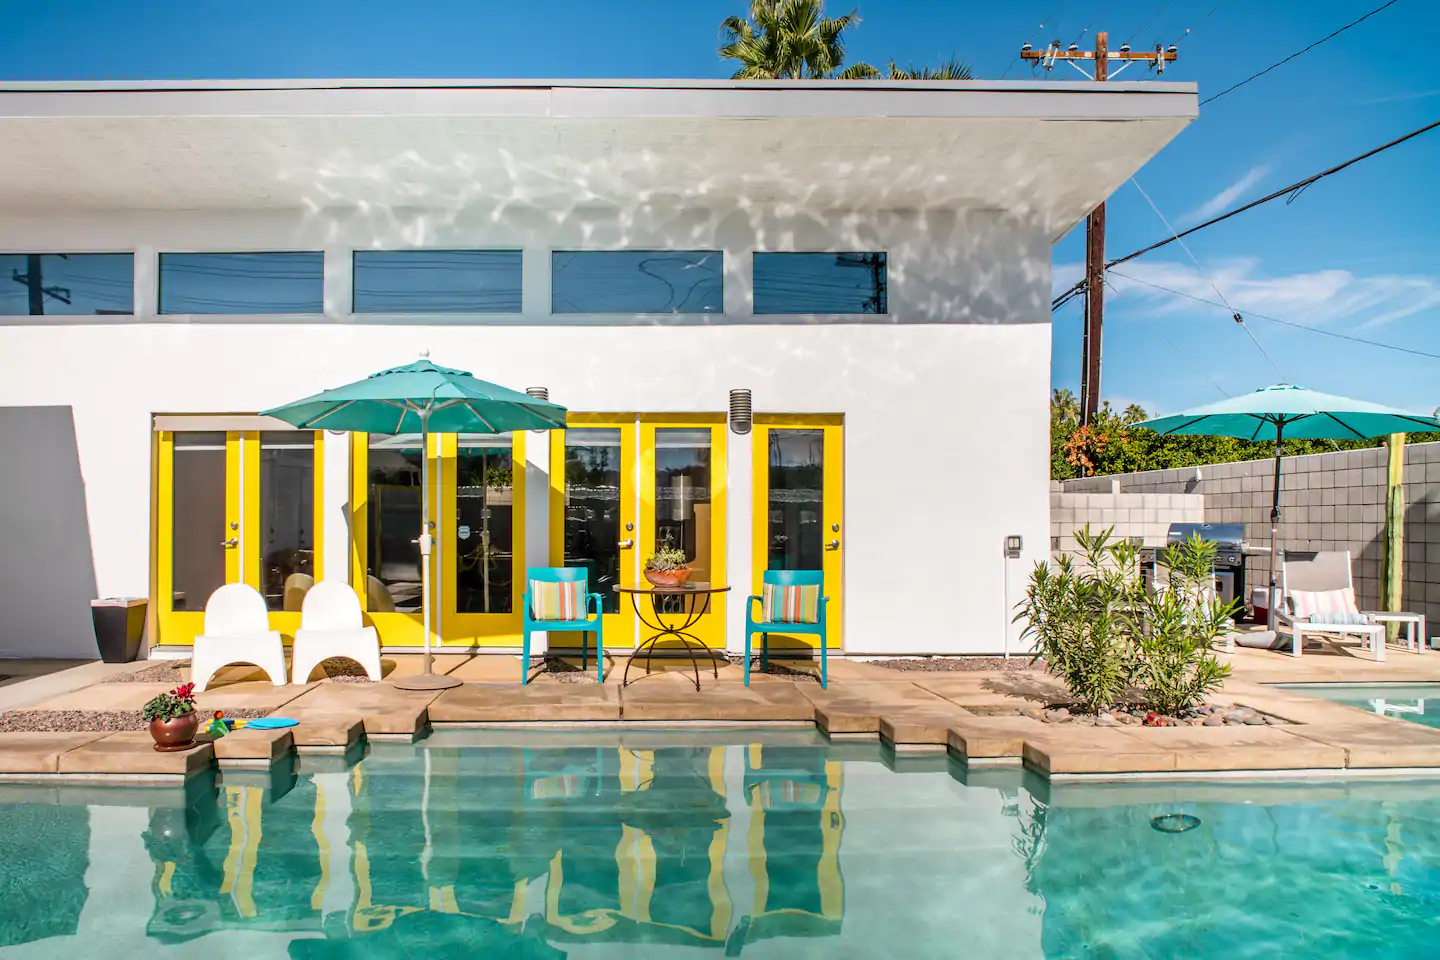 Bright, bold, colorful Airbnb front, with yellow doors and a pool